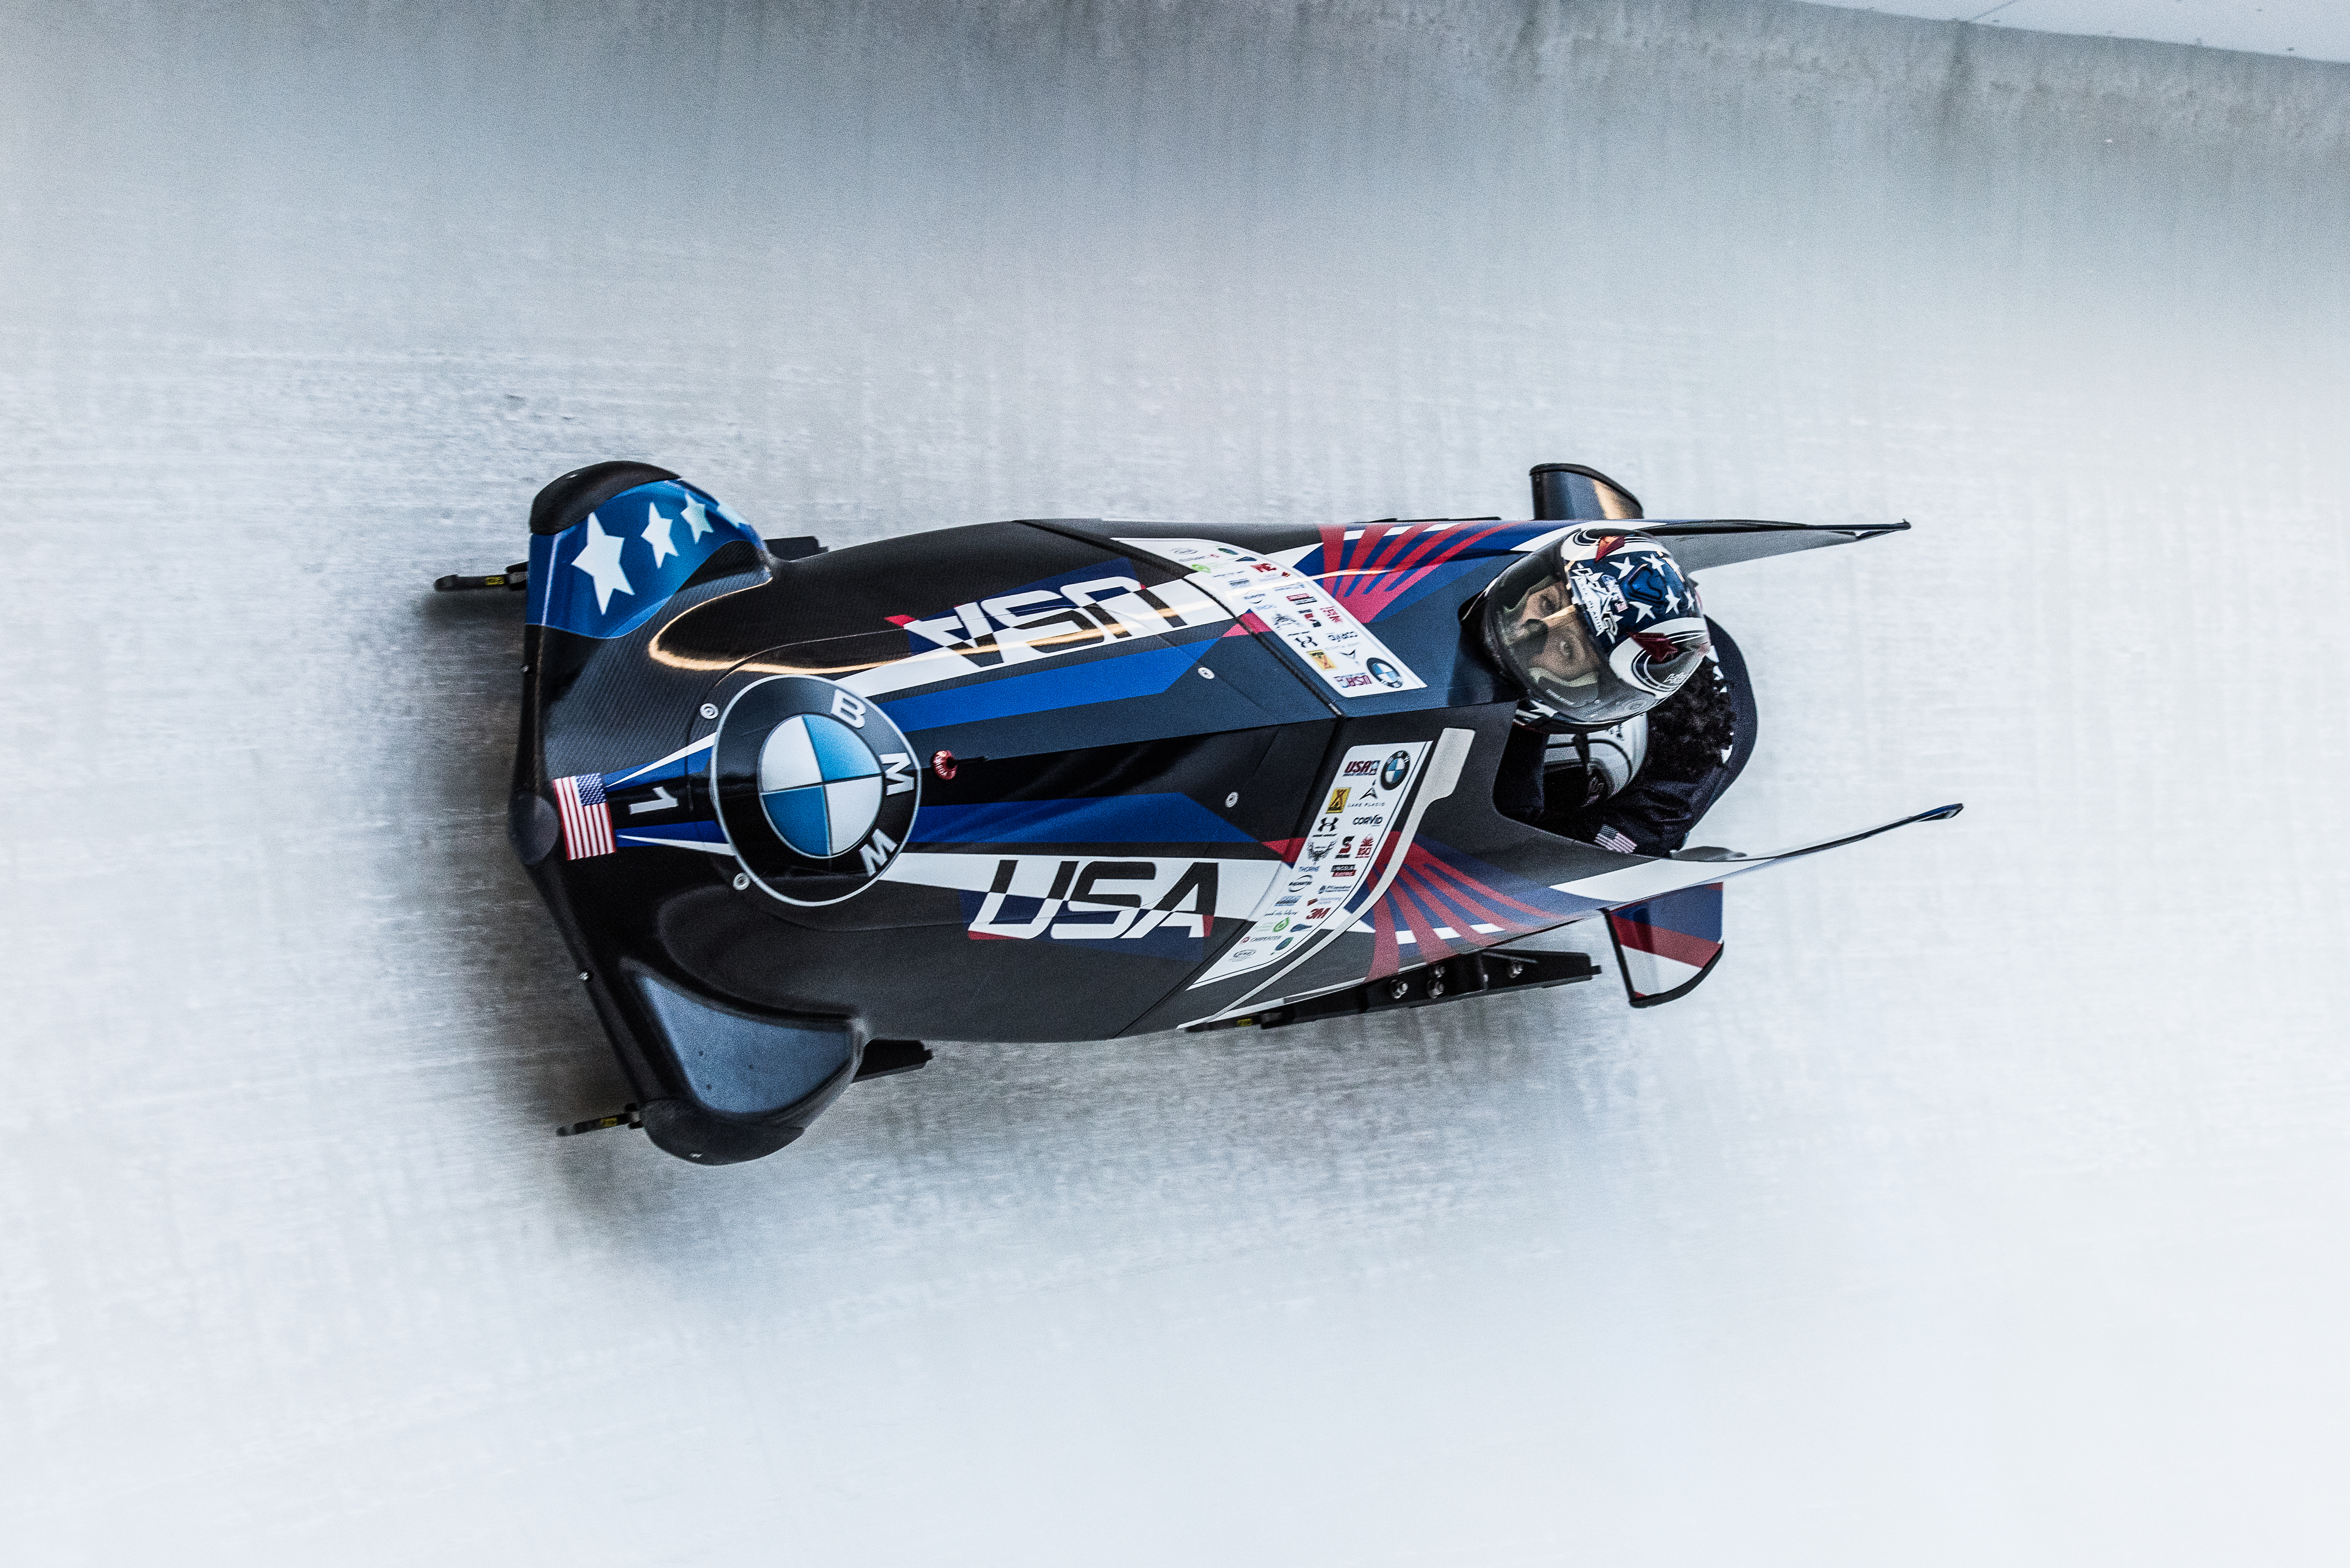 Jamie Greubel Poser races Olympic bobsled